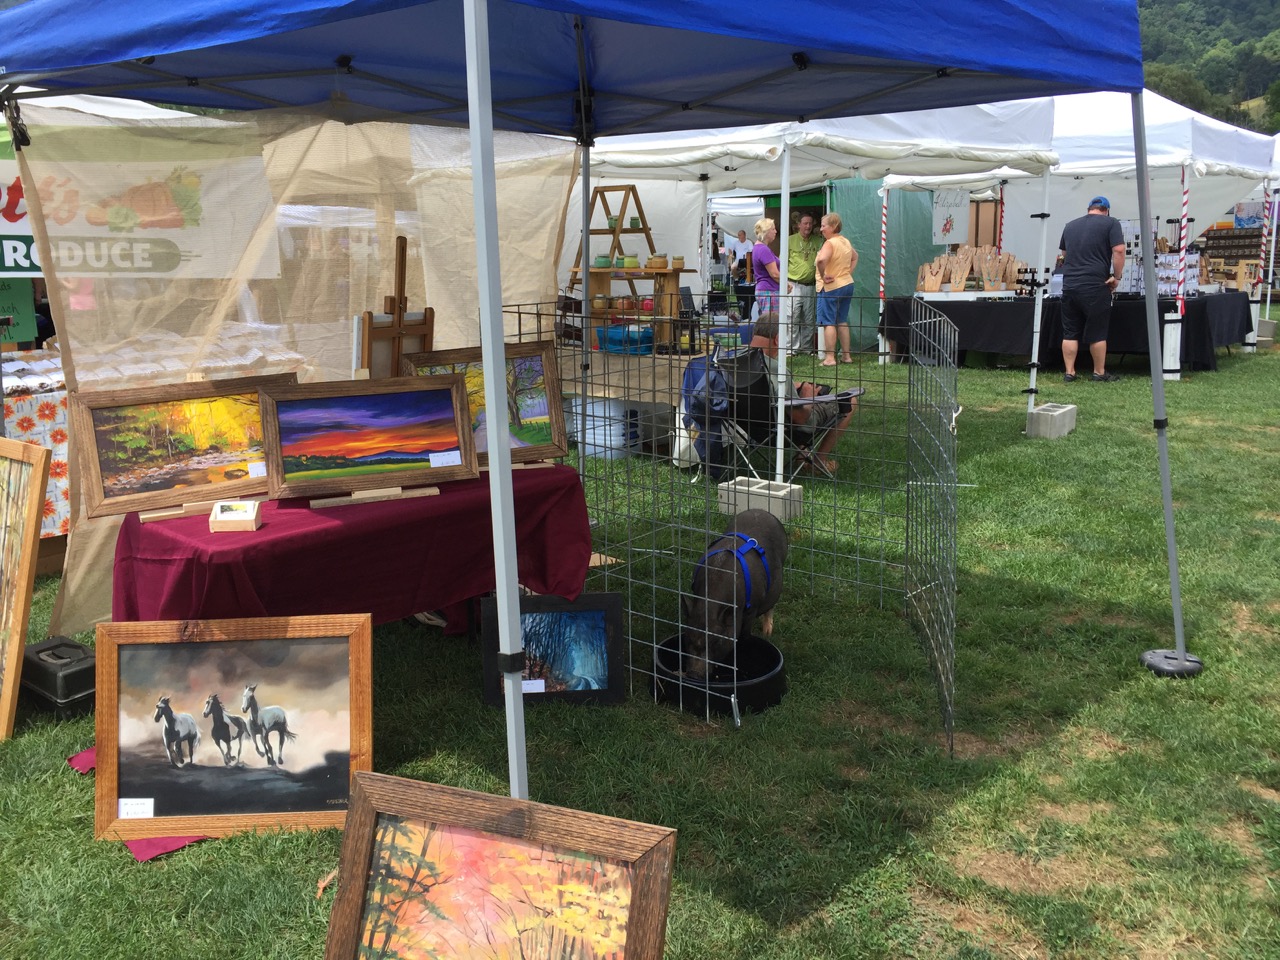 Trends For Arts And Craft Show Near Me This Weekend - Gallery of Arts and Crafts